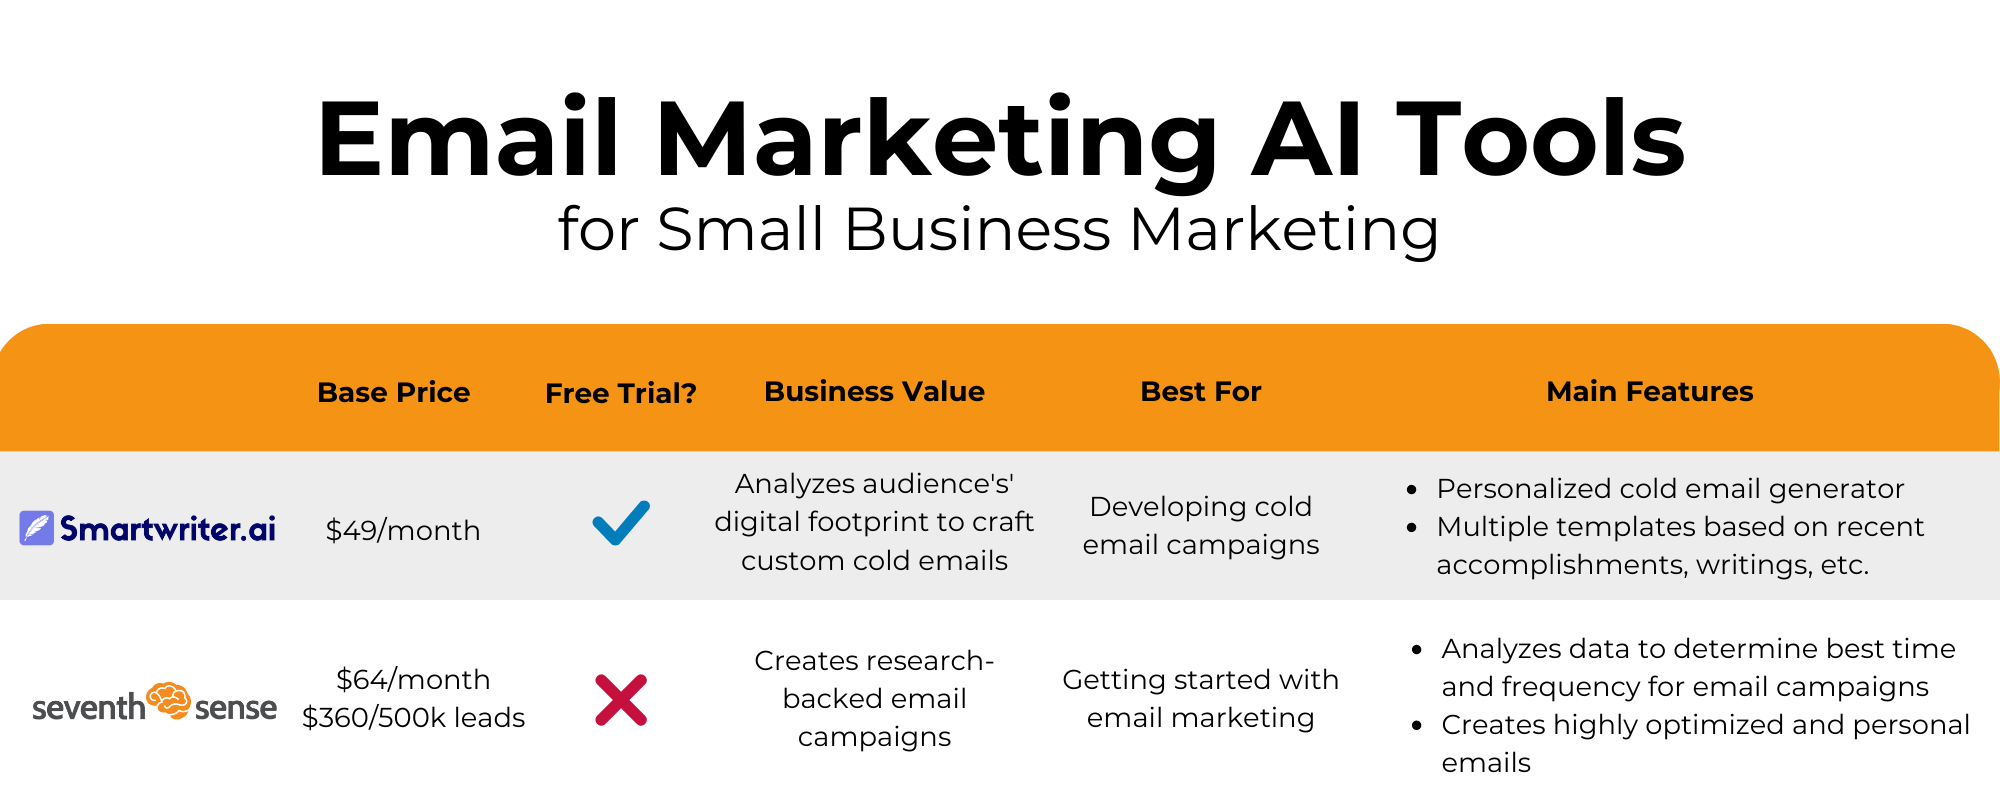 email marketing ai tools visual chart comparison for small businesses